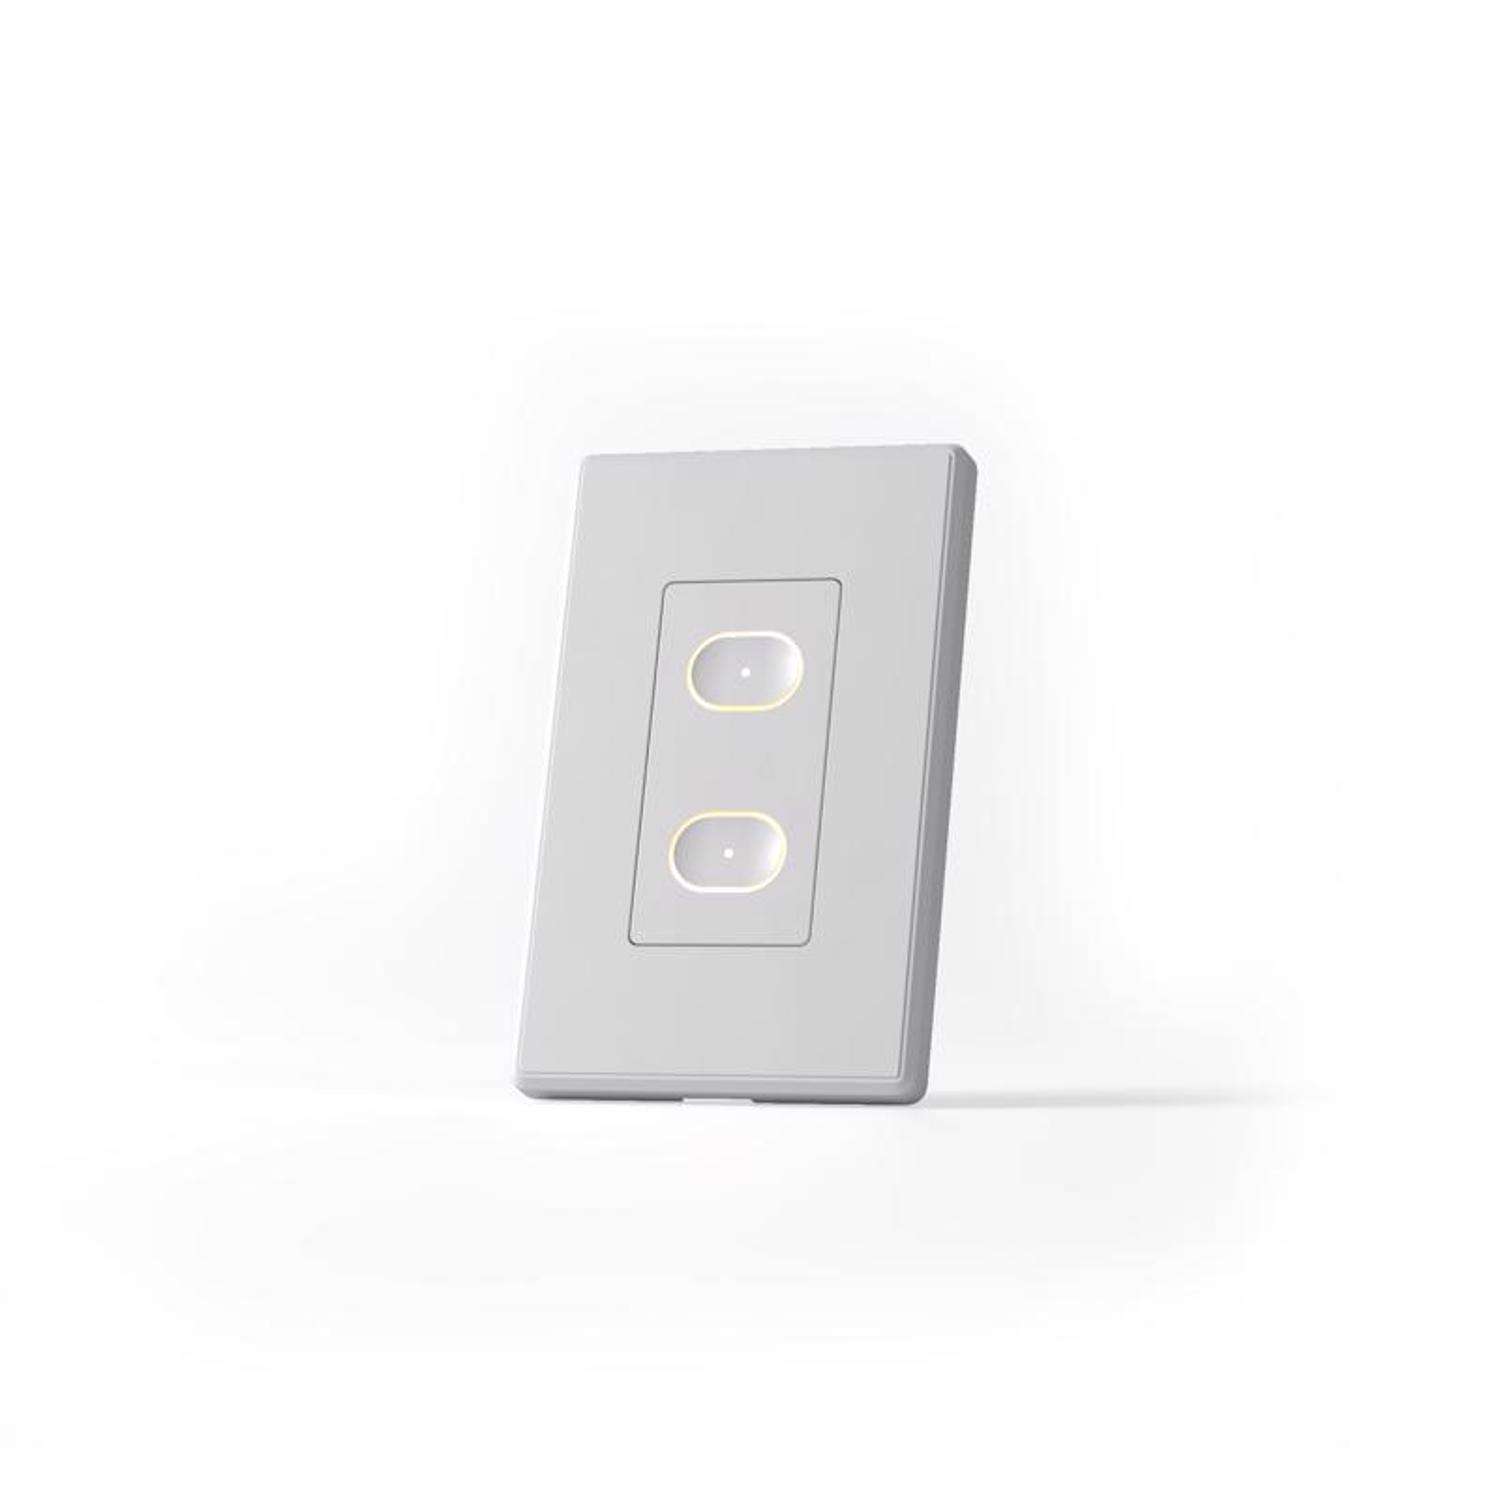 Feit Electric 3011475 Smart Switch, White